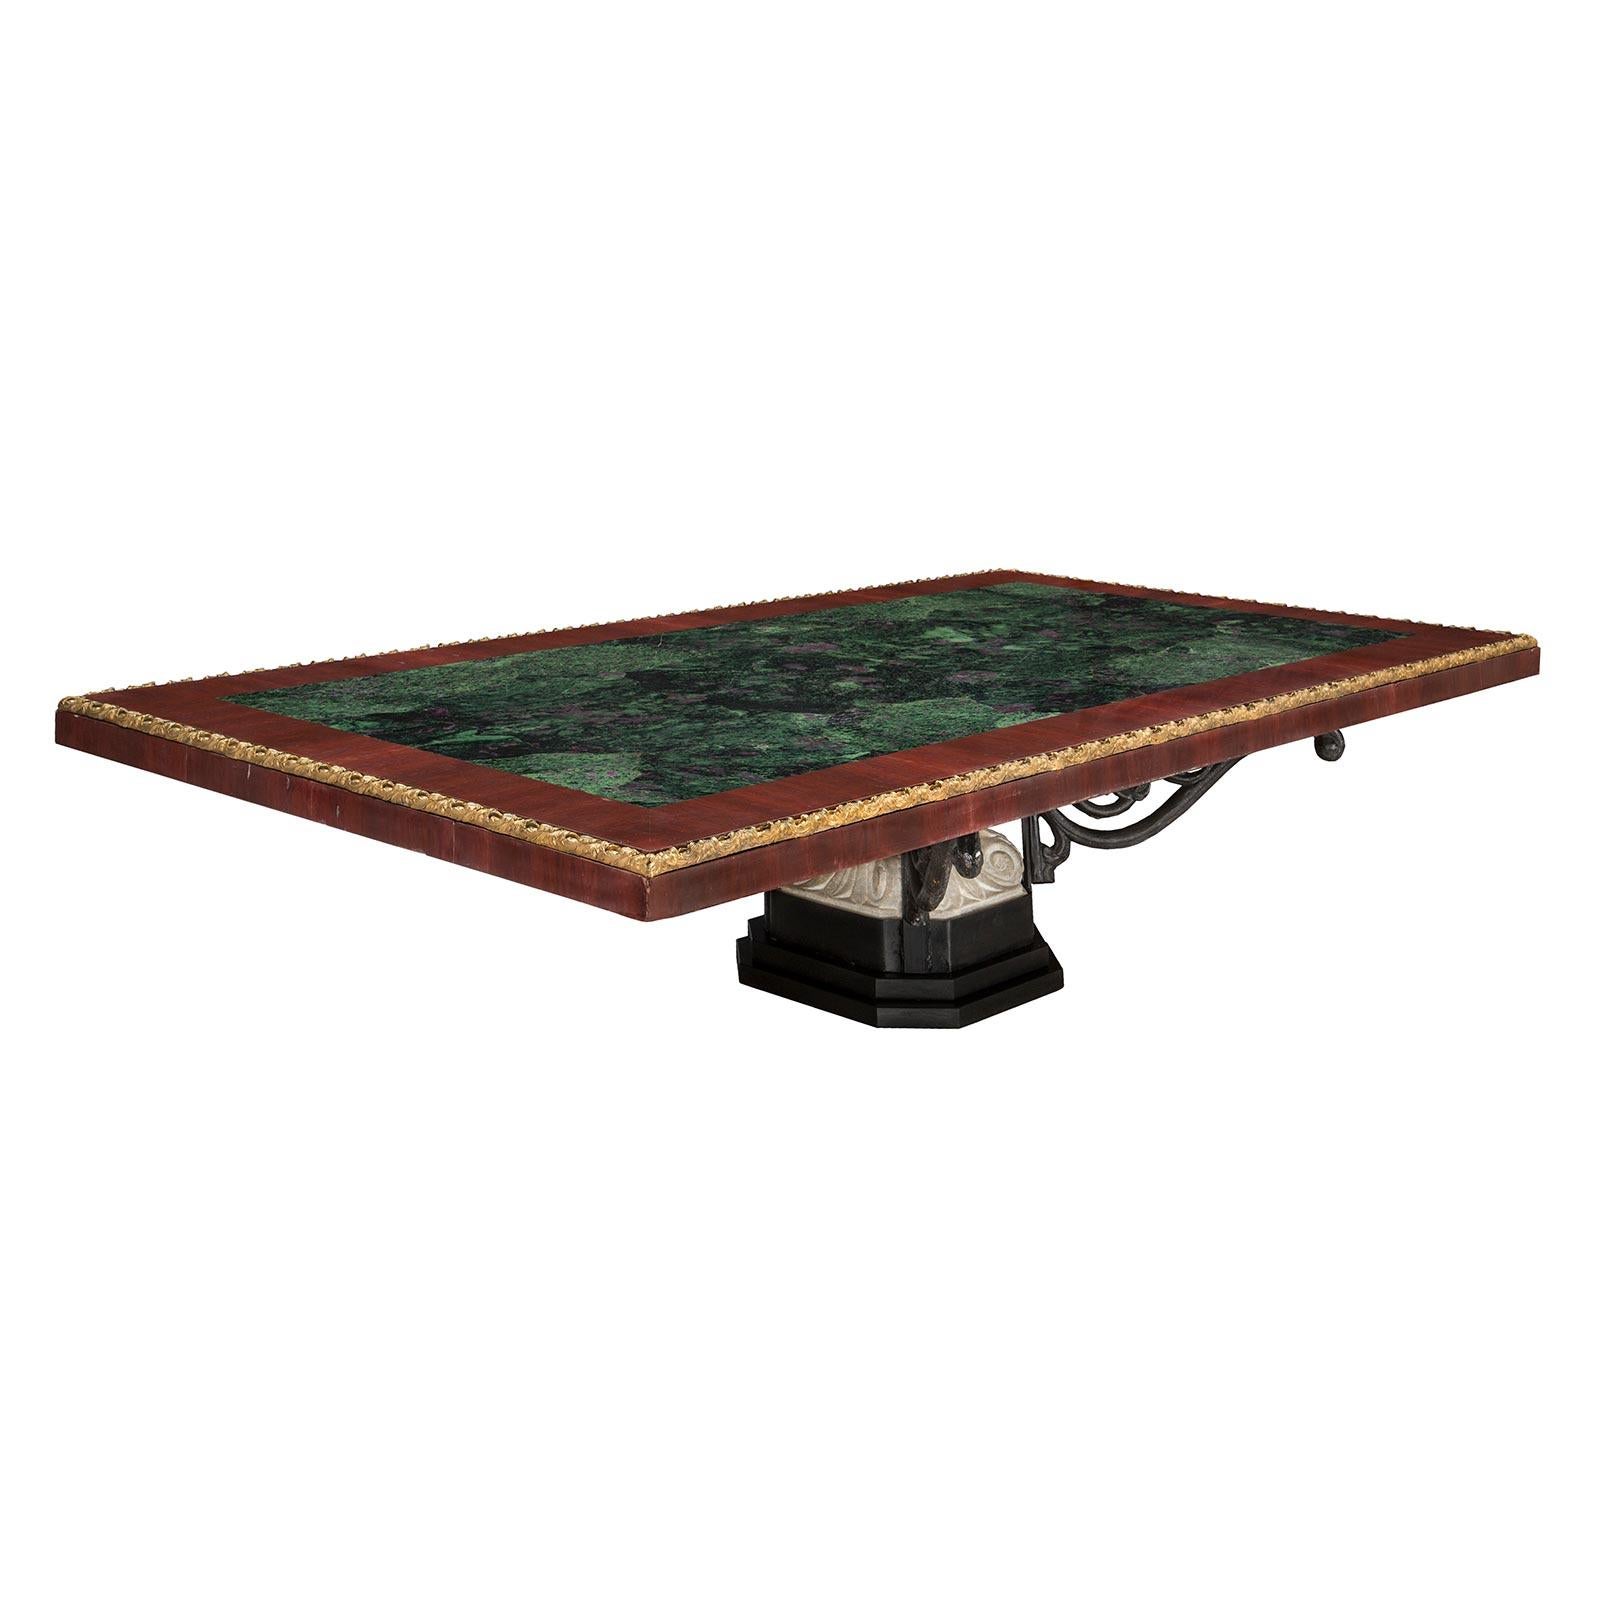 Italian 19th Century Marble, Wrought Iron and Ormolu Coffee Table For Sale 1